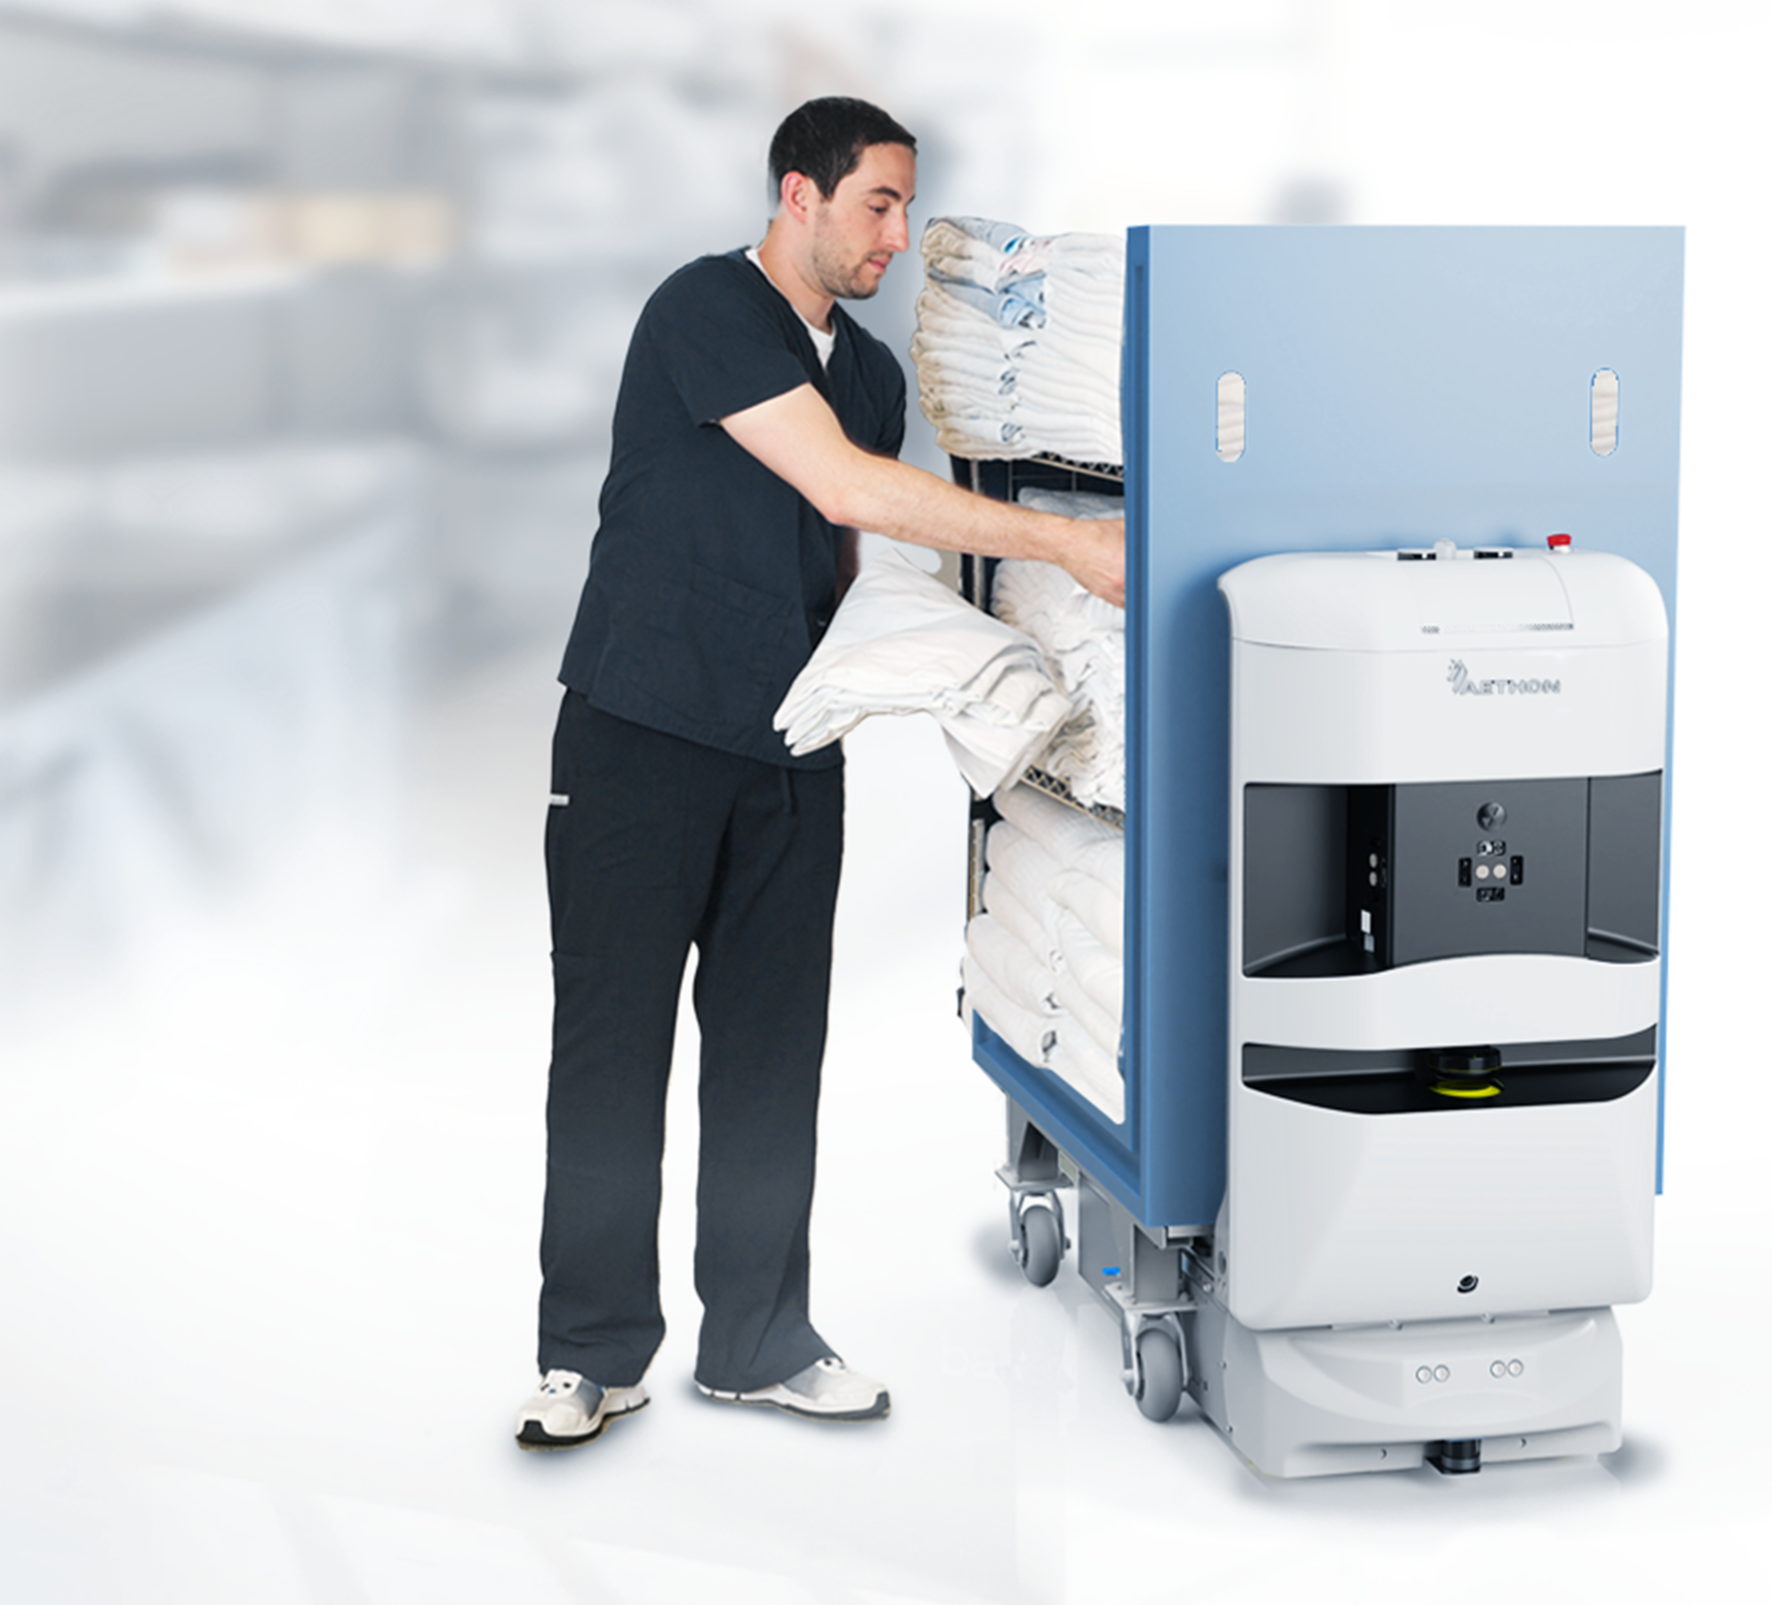 Aethon Hospital robots. Providing healthcare mobile robot, linen delivery robot and robots at hospitals.